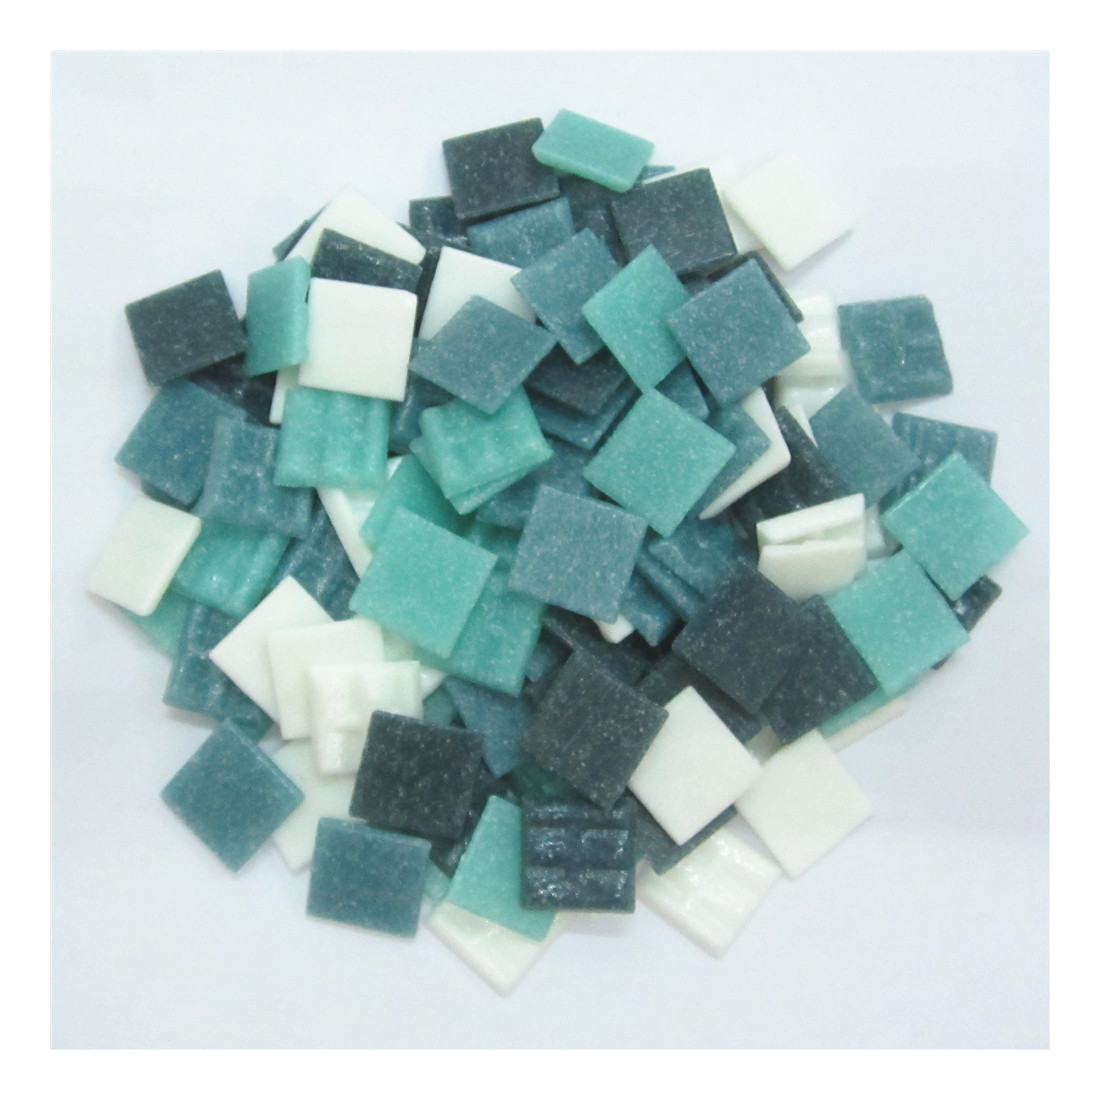 Hot Sale Design Square Shape Glass Craft Mosaic Tiles for Crafts Colorful